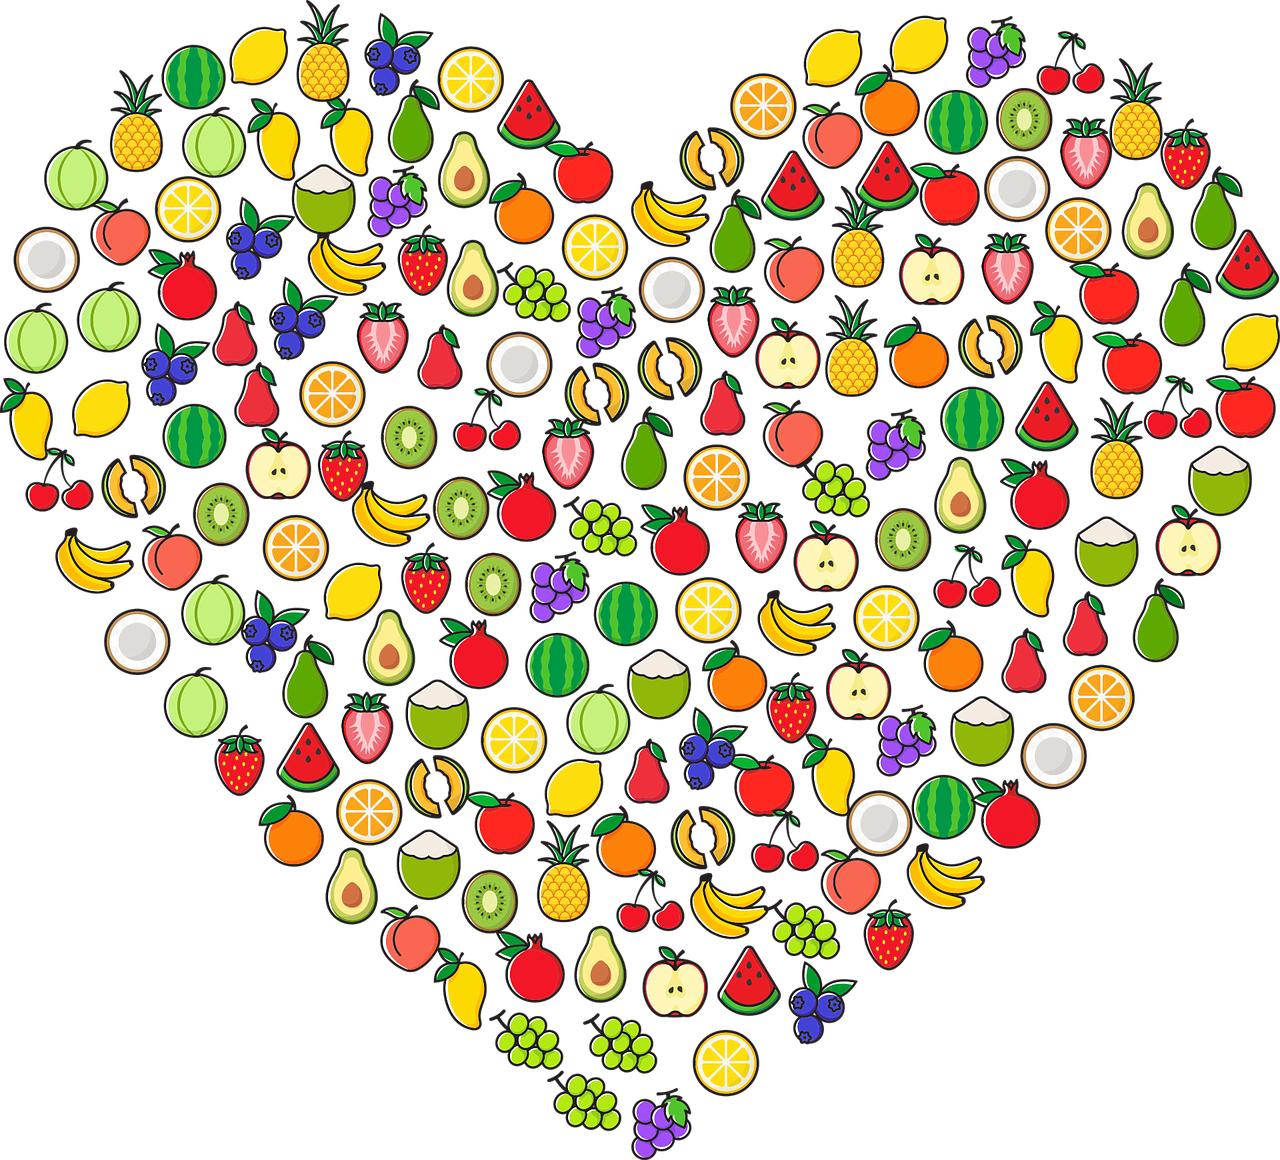 A heart made out of images of fruit